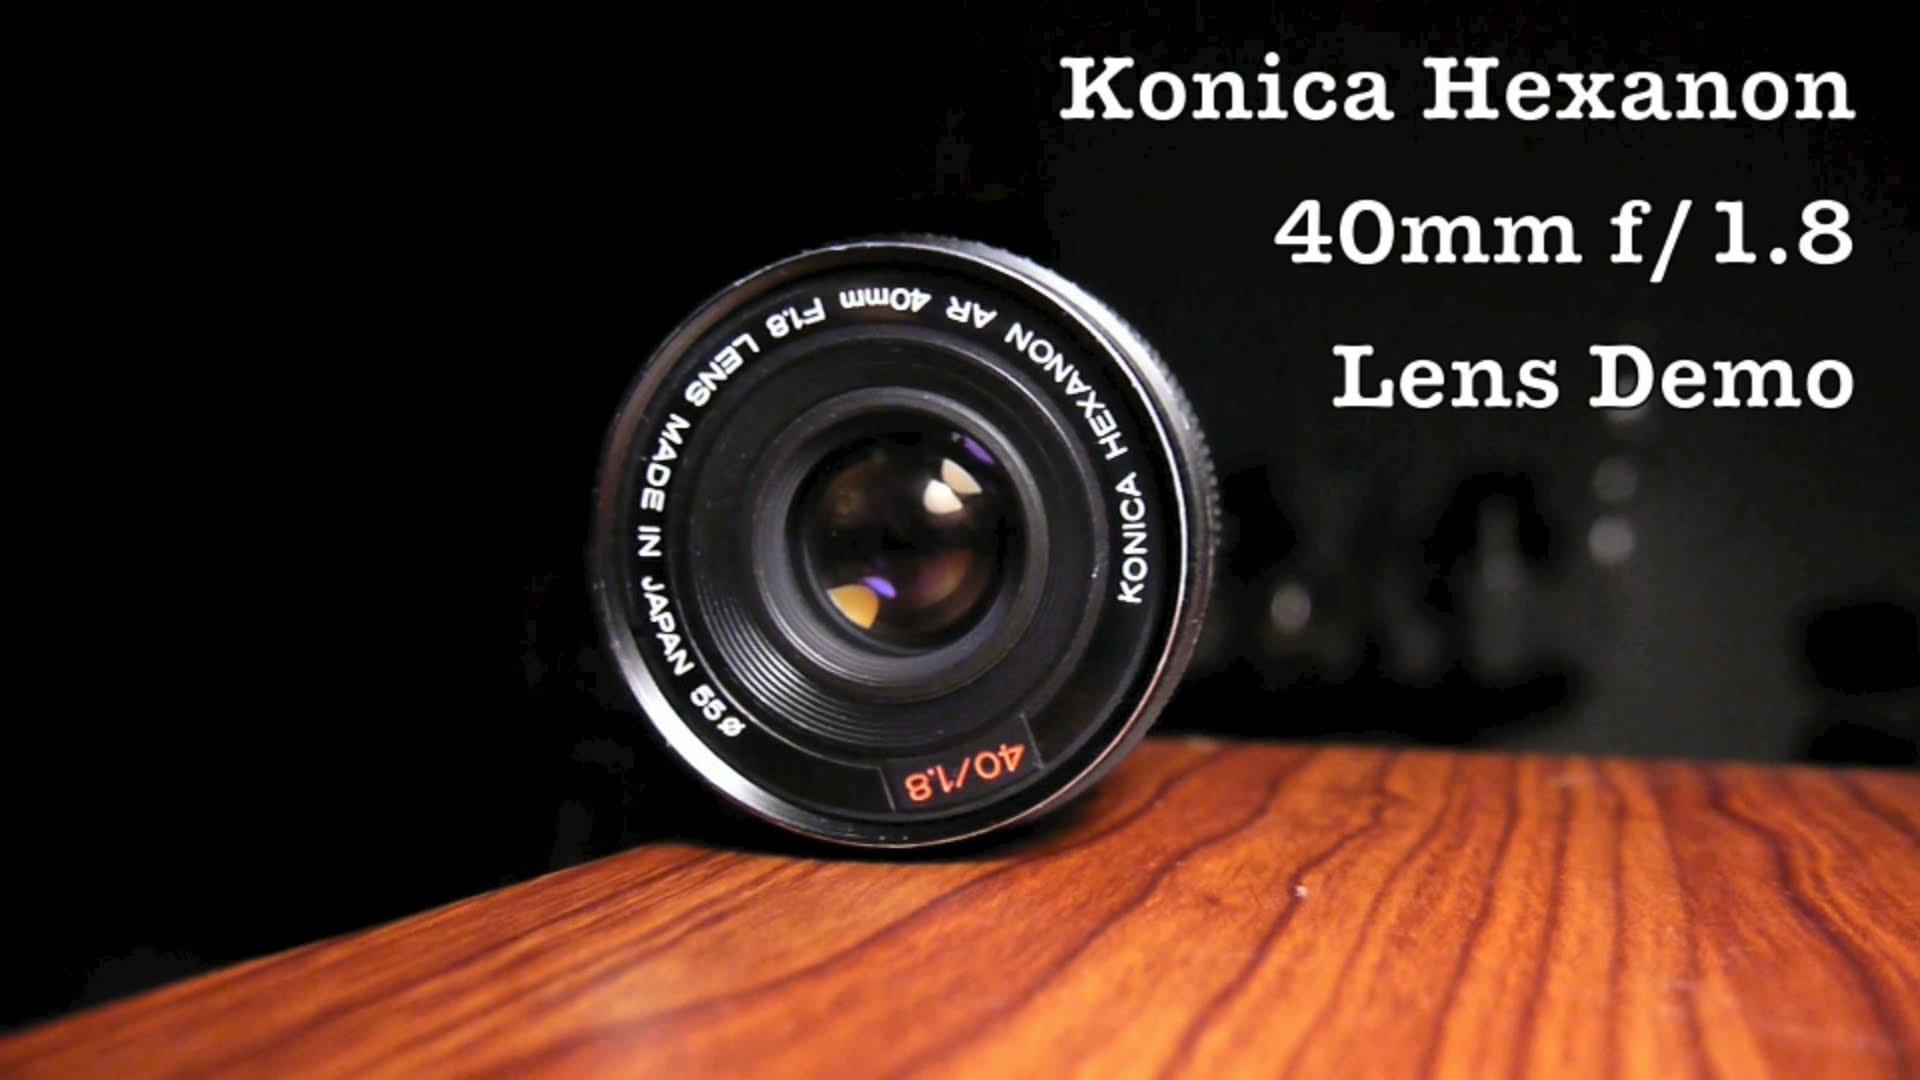 Konica Hexanon 40mm f/1.8 Pancake Lens For AR Mount Cameras From Used 35mm to DSLR / Compact Systems